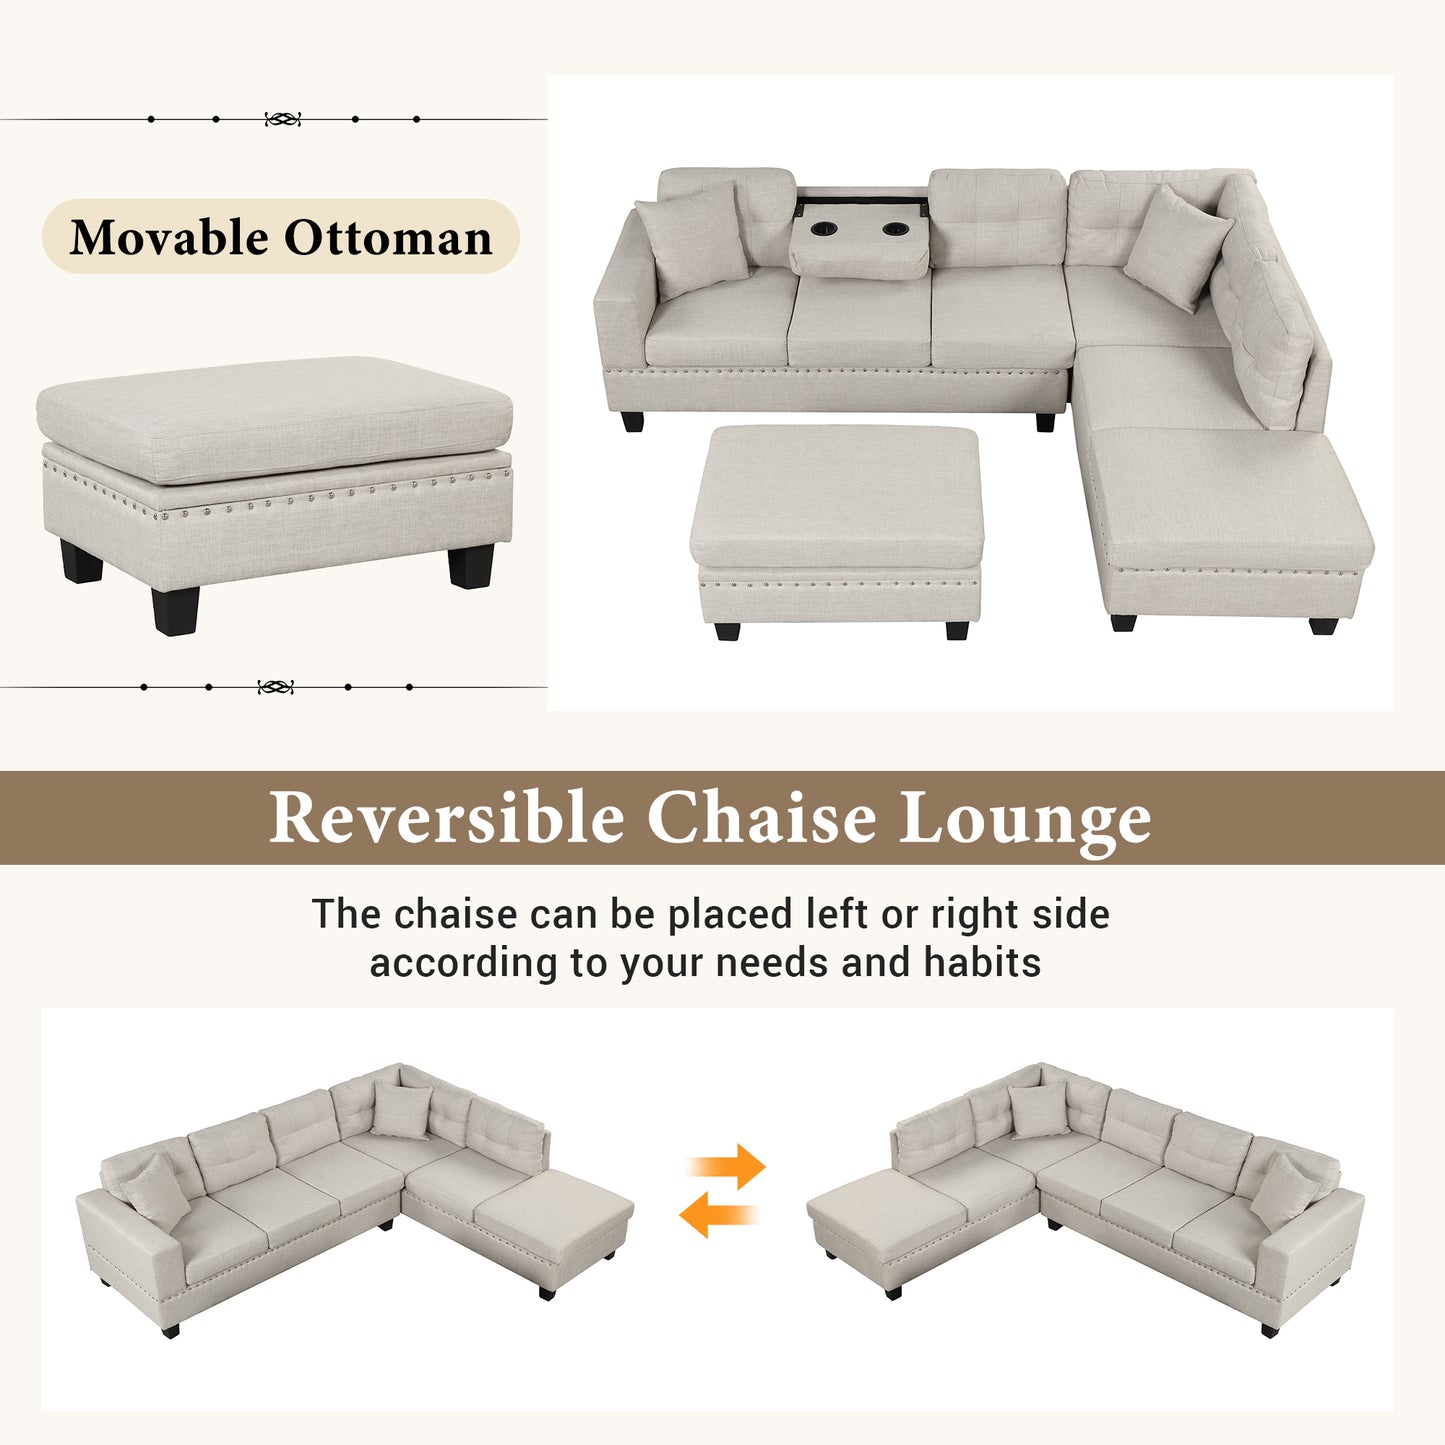 Modern Sectional Sofa with Storage Ottoman, L-Shape Couch with 2 Pillows and Cup Holder, Sectional Sofa with Reversible Chaise for Living Room, Light Gray